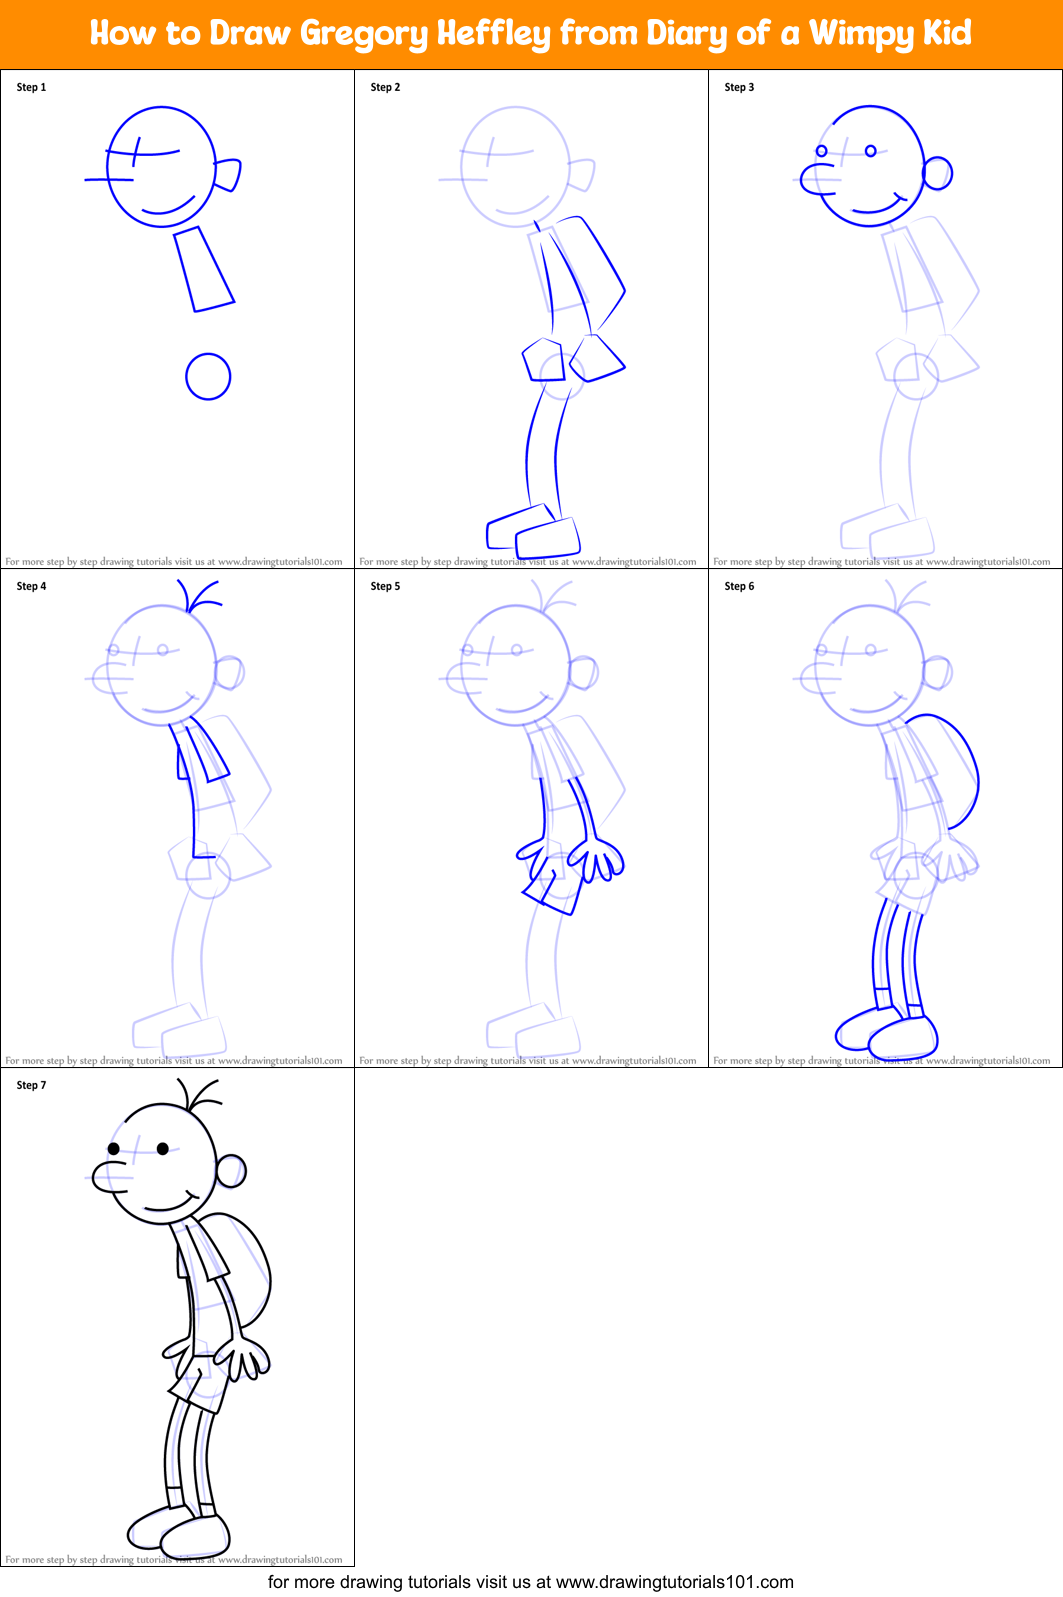 How to Draw Gregory Heffley from Diary of a Wimpy Kid printable step by